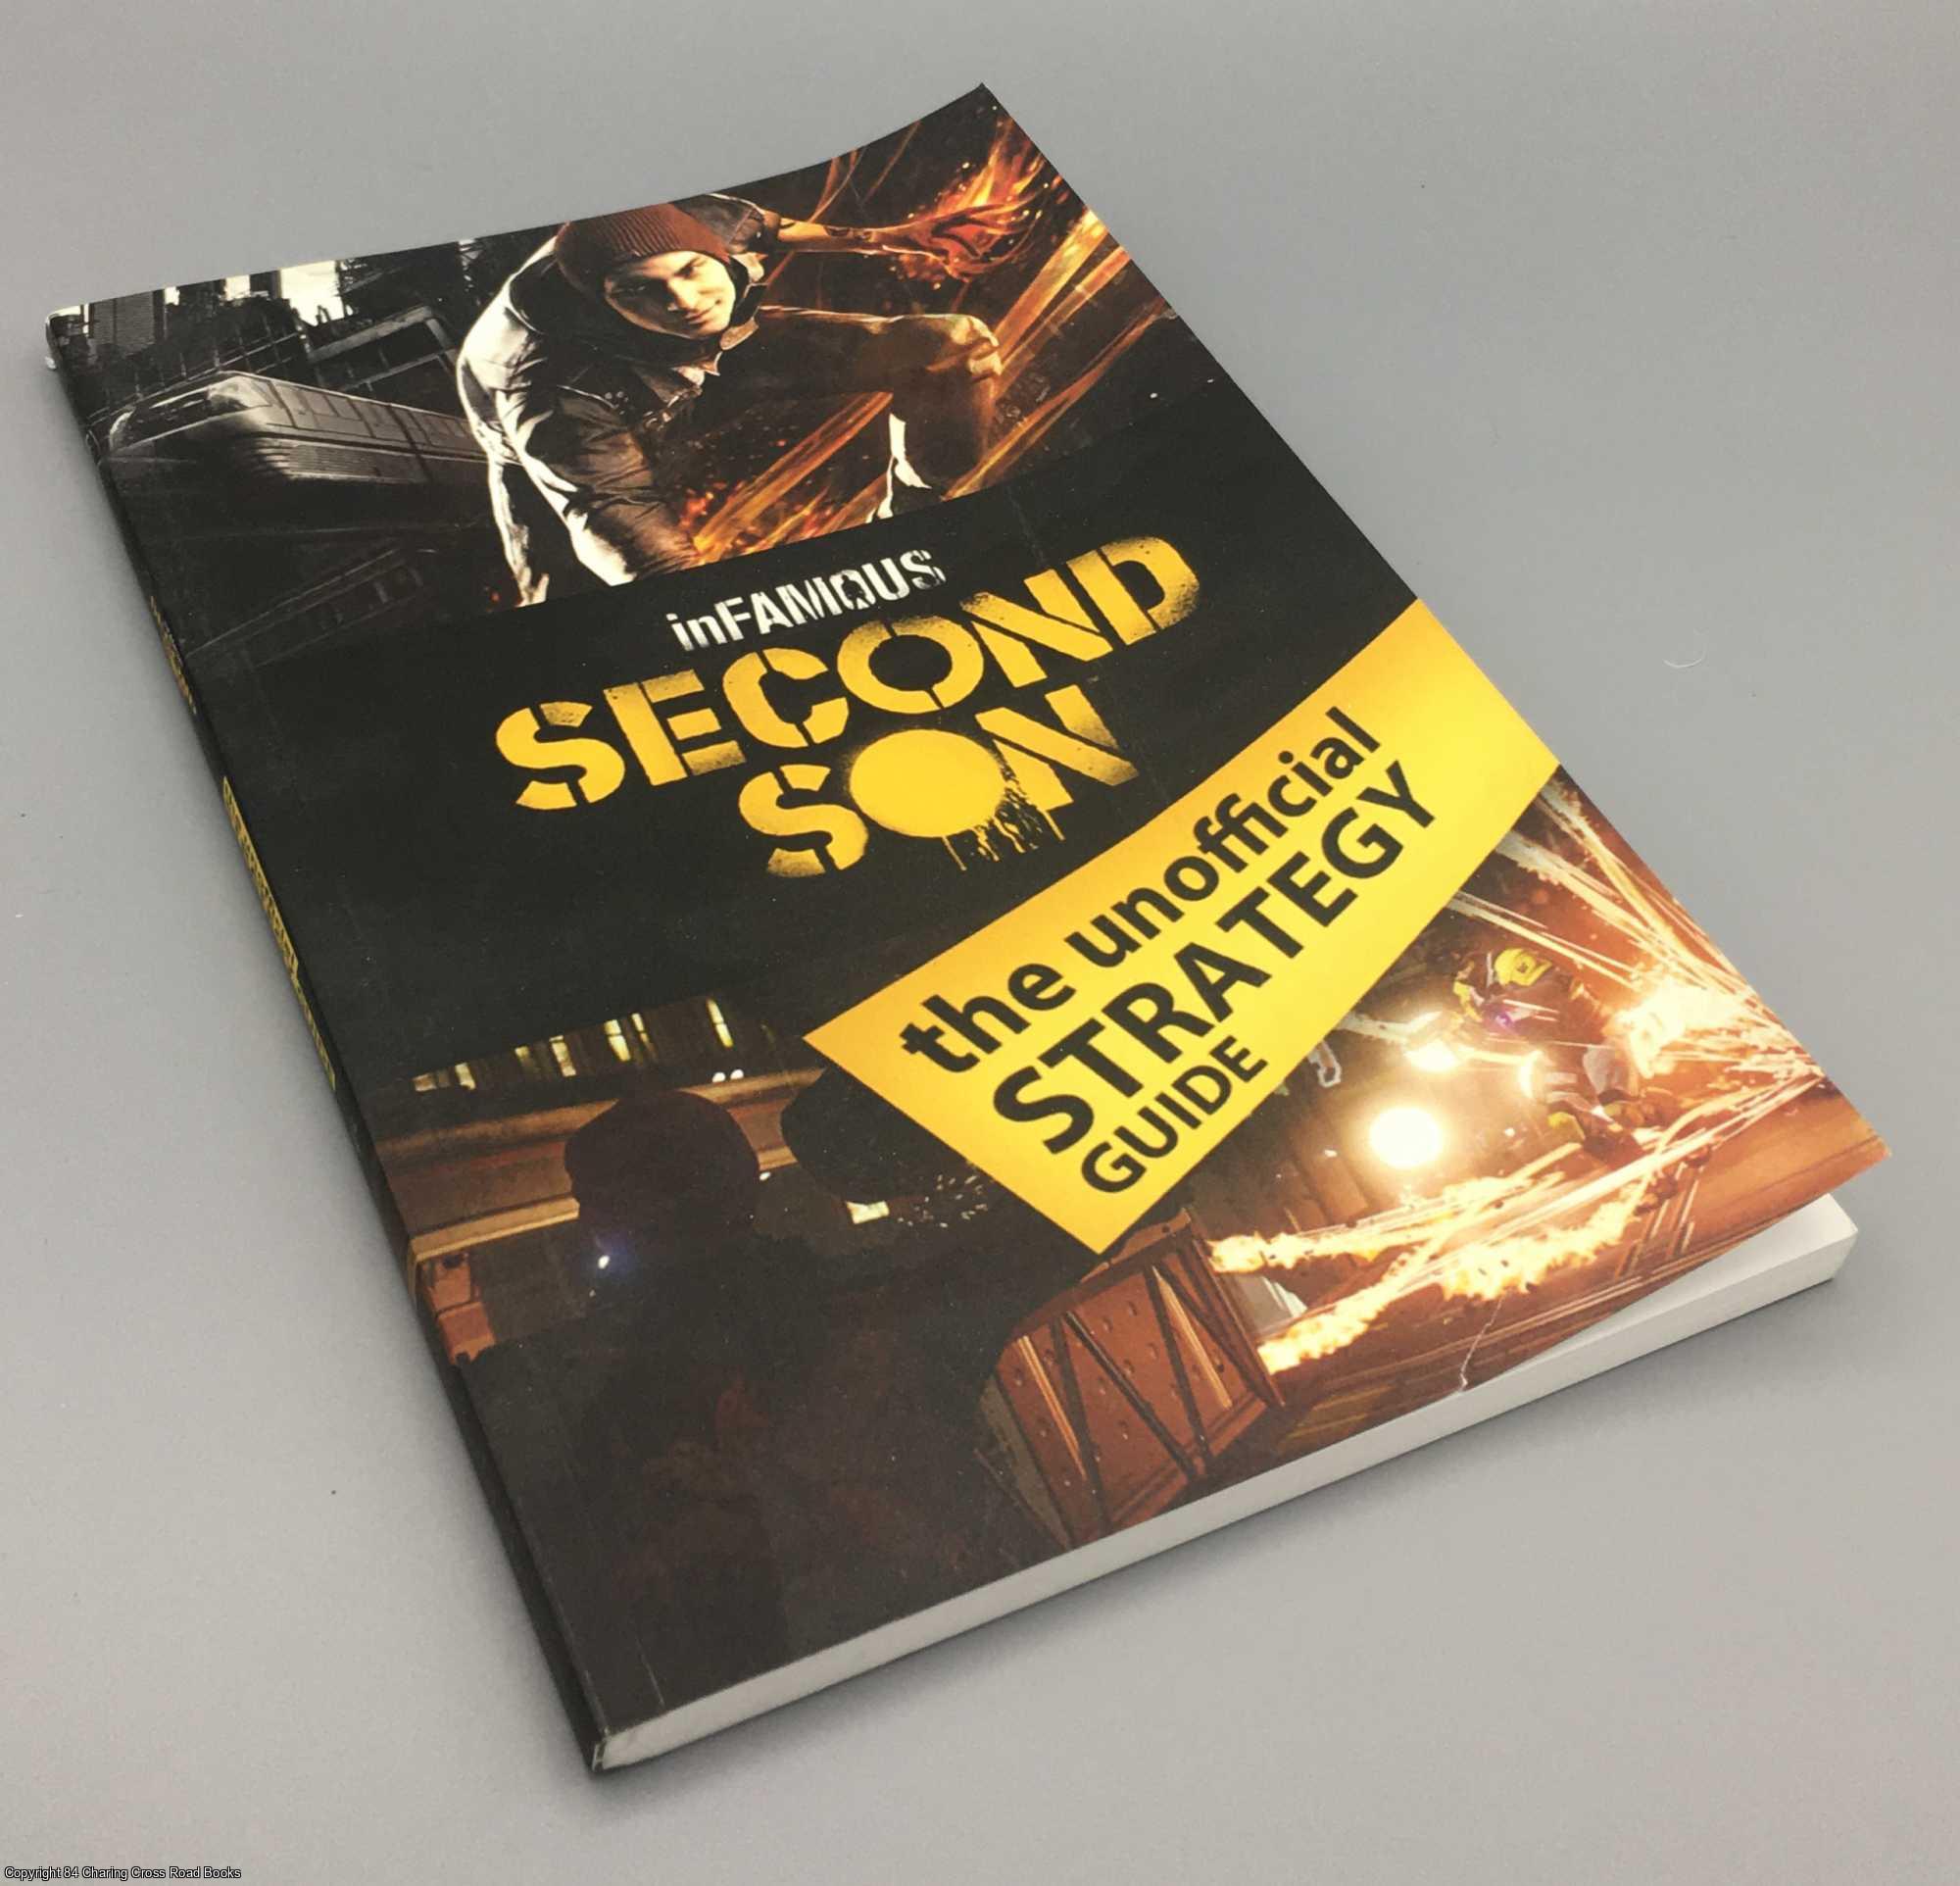  - inFamous Second Son: The Unofficial Strategy Guide